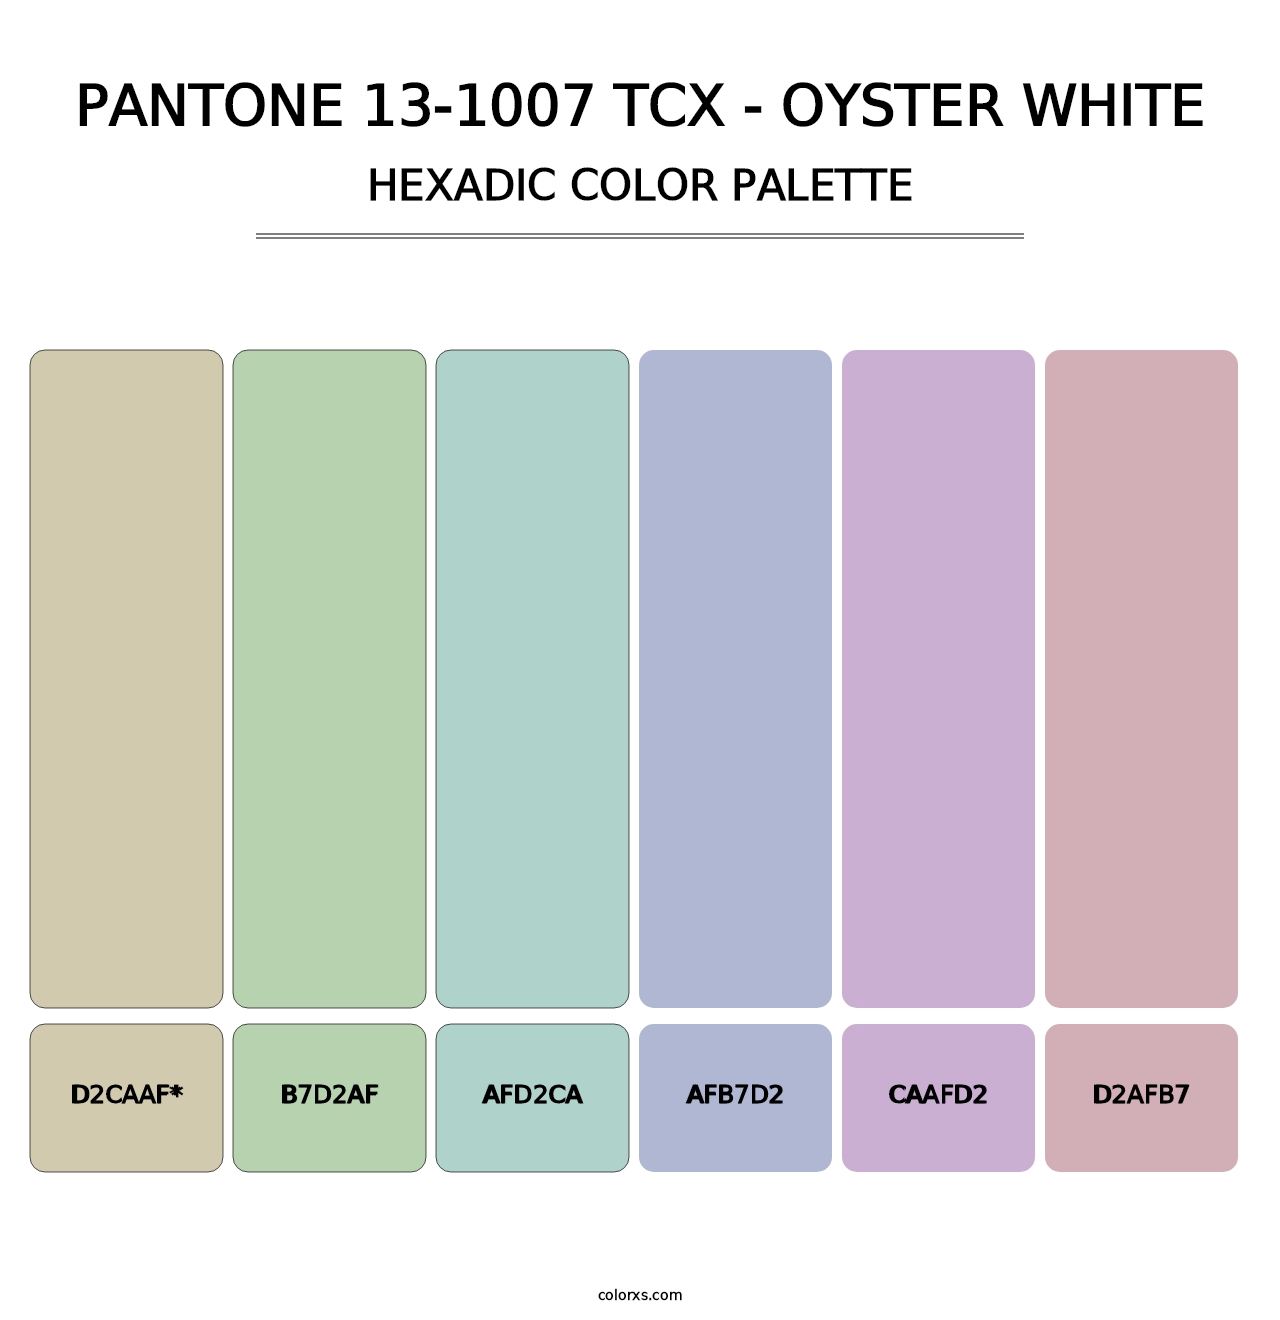 PANTONE 13-1007 TCX - Oyster White - Hexadic Color Palette